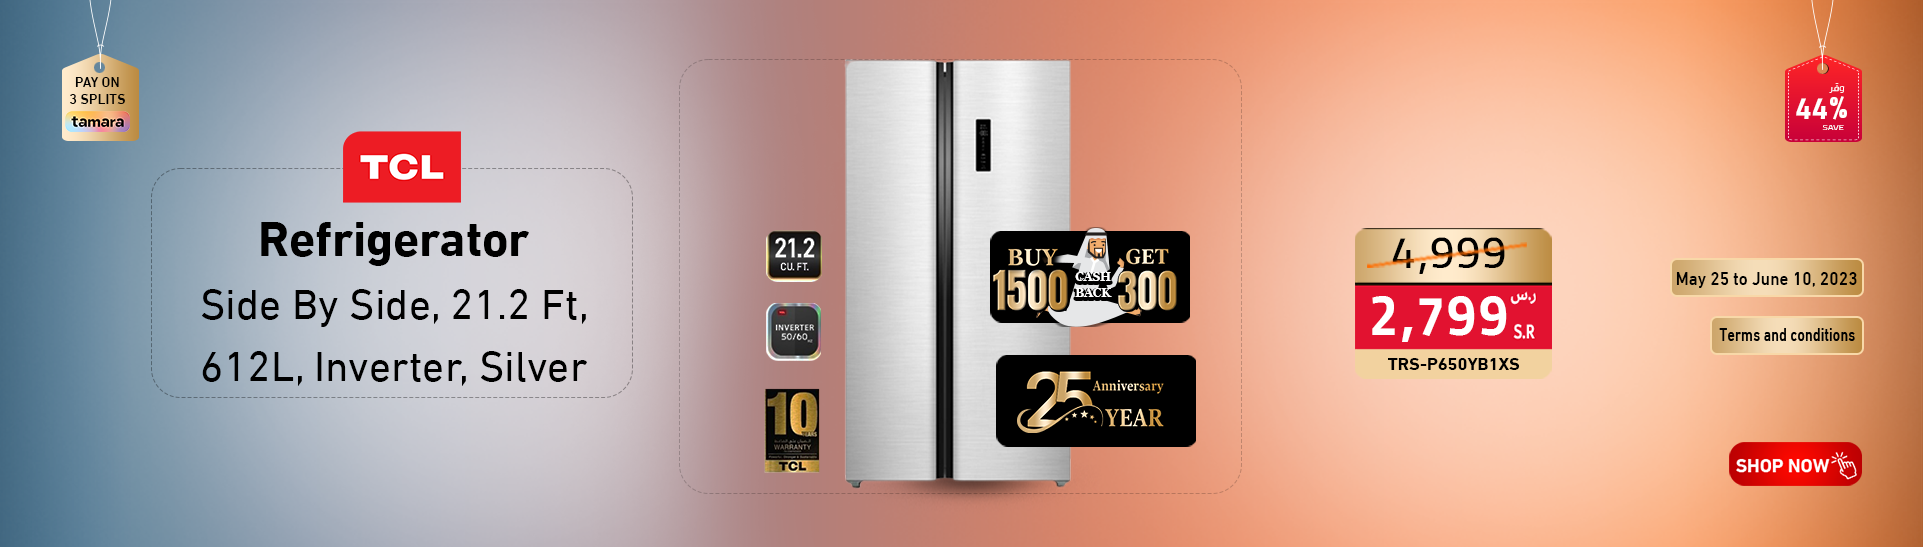 TCL side by side refrigerator